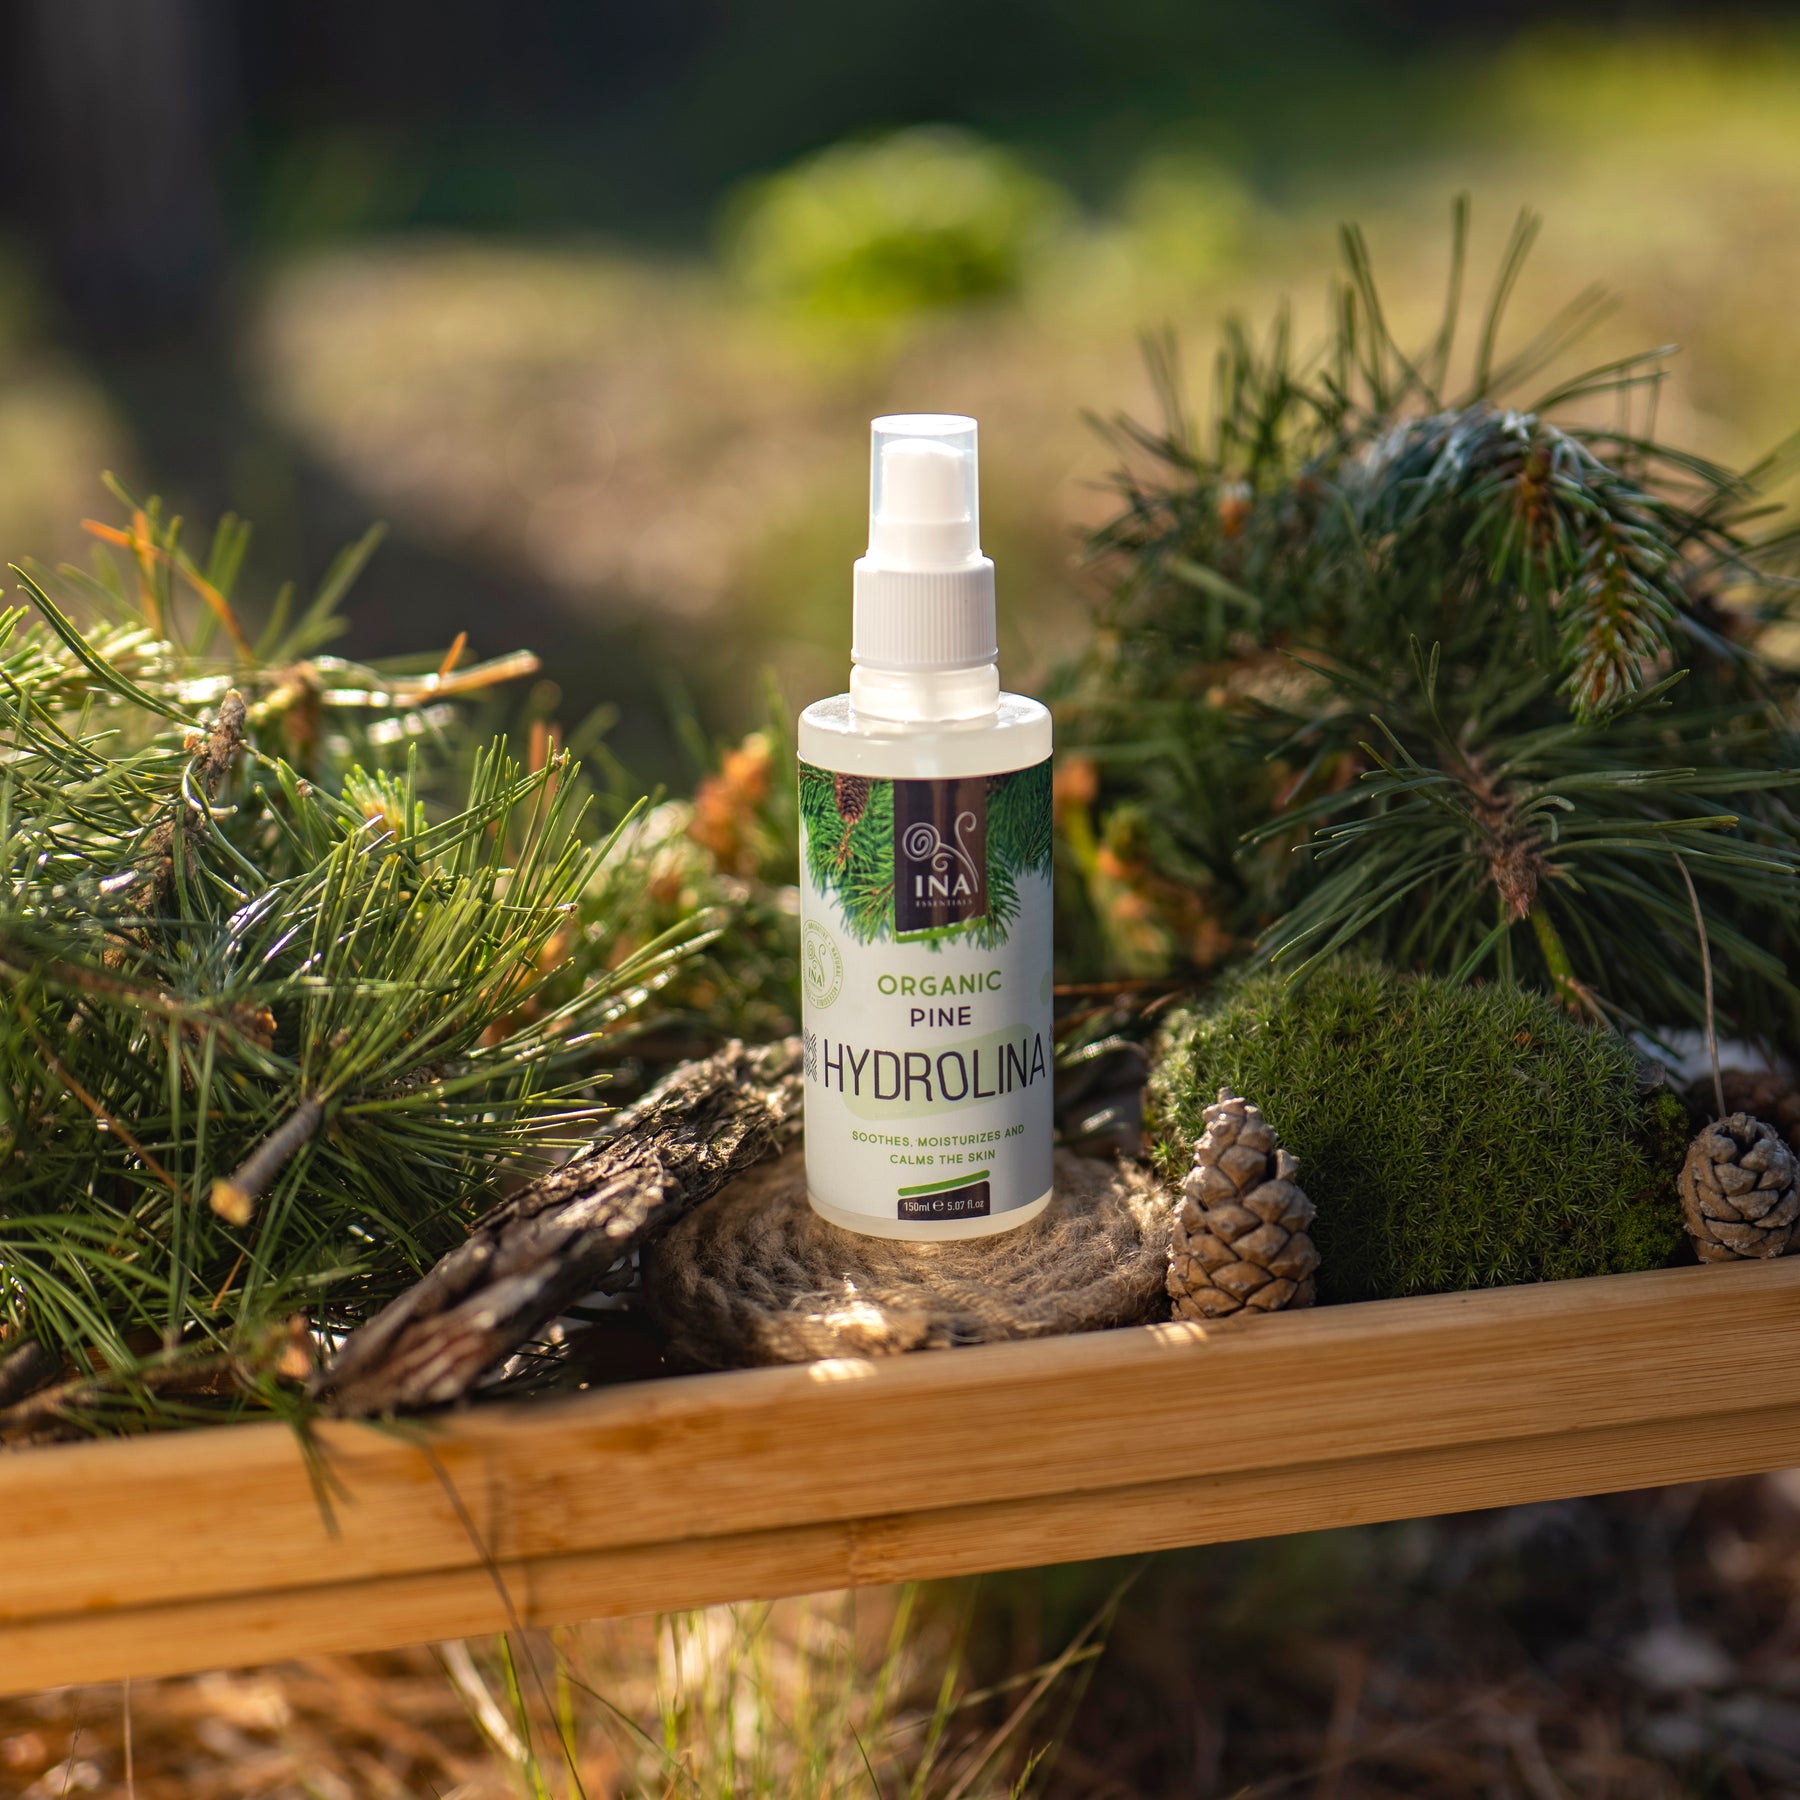 Organic White Pine Water - Hydrolina - Spray for skin Fungus and smelly feet